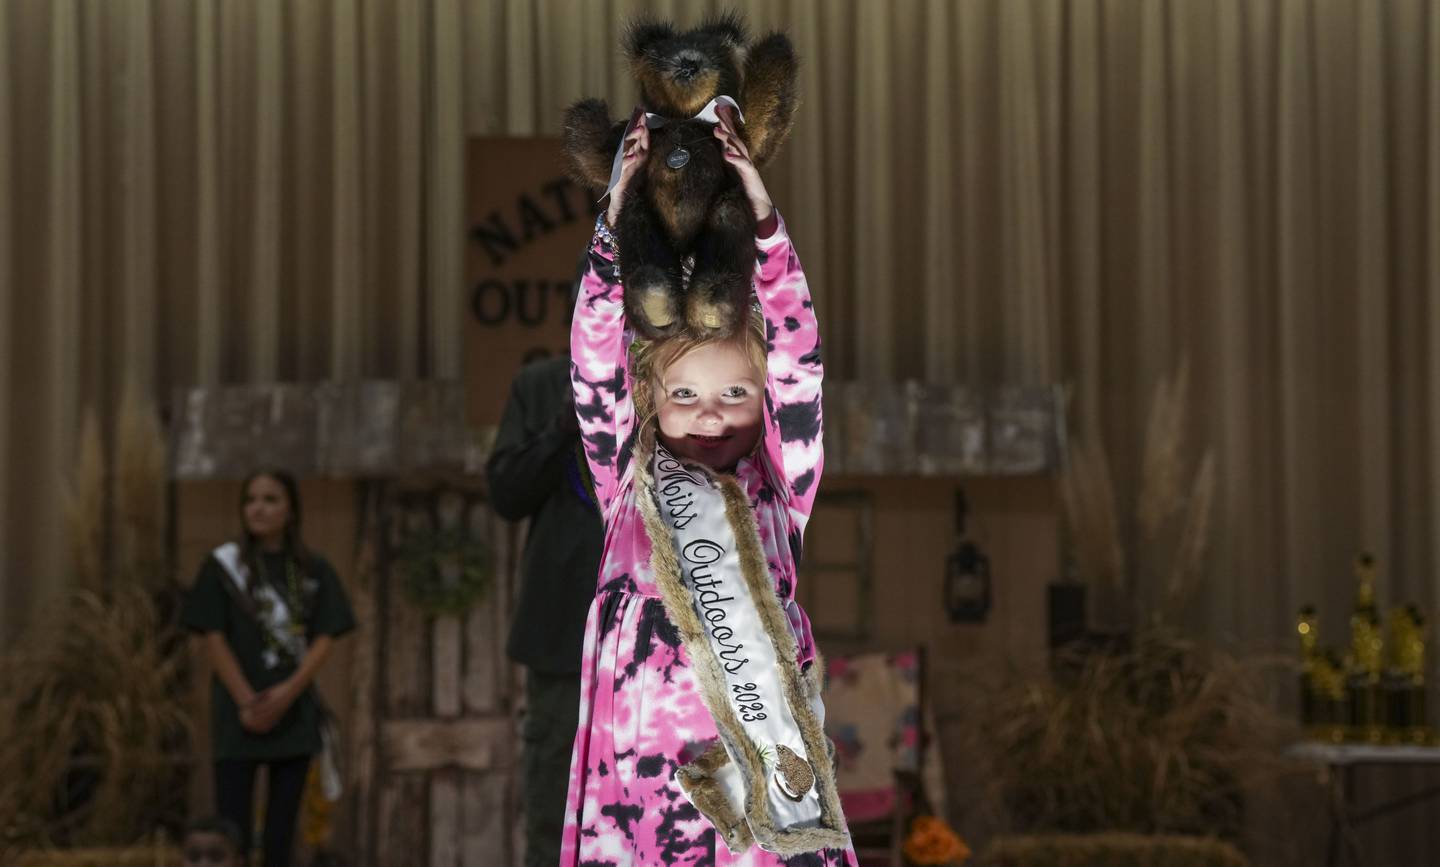 Little Miss Outdoors 2023 holds up a teddy bear made of muskrats during the live auction. The bear fetched $2,000.